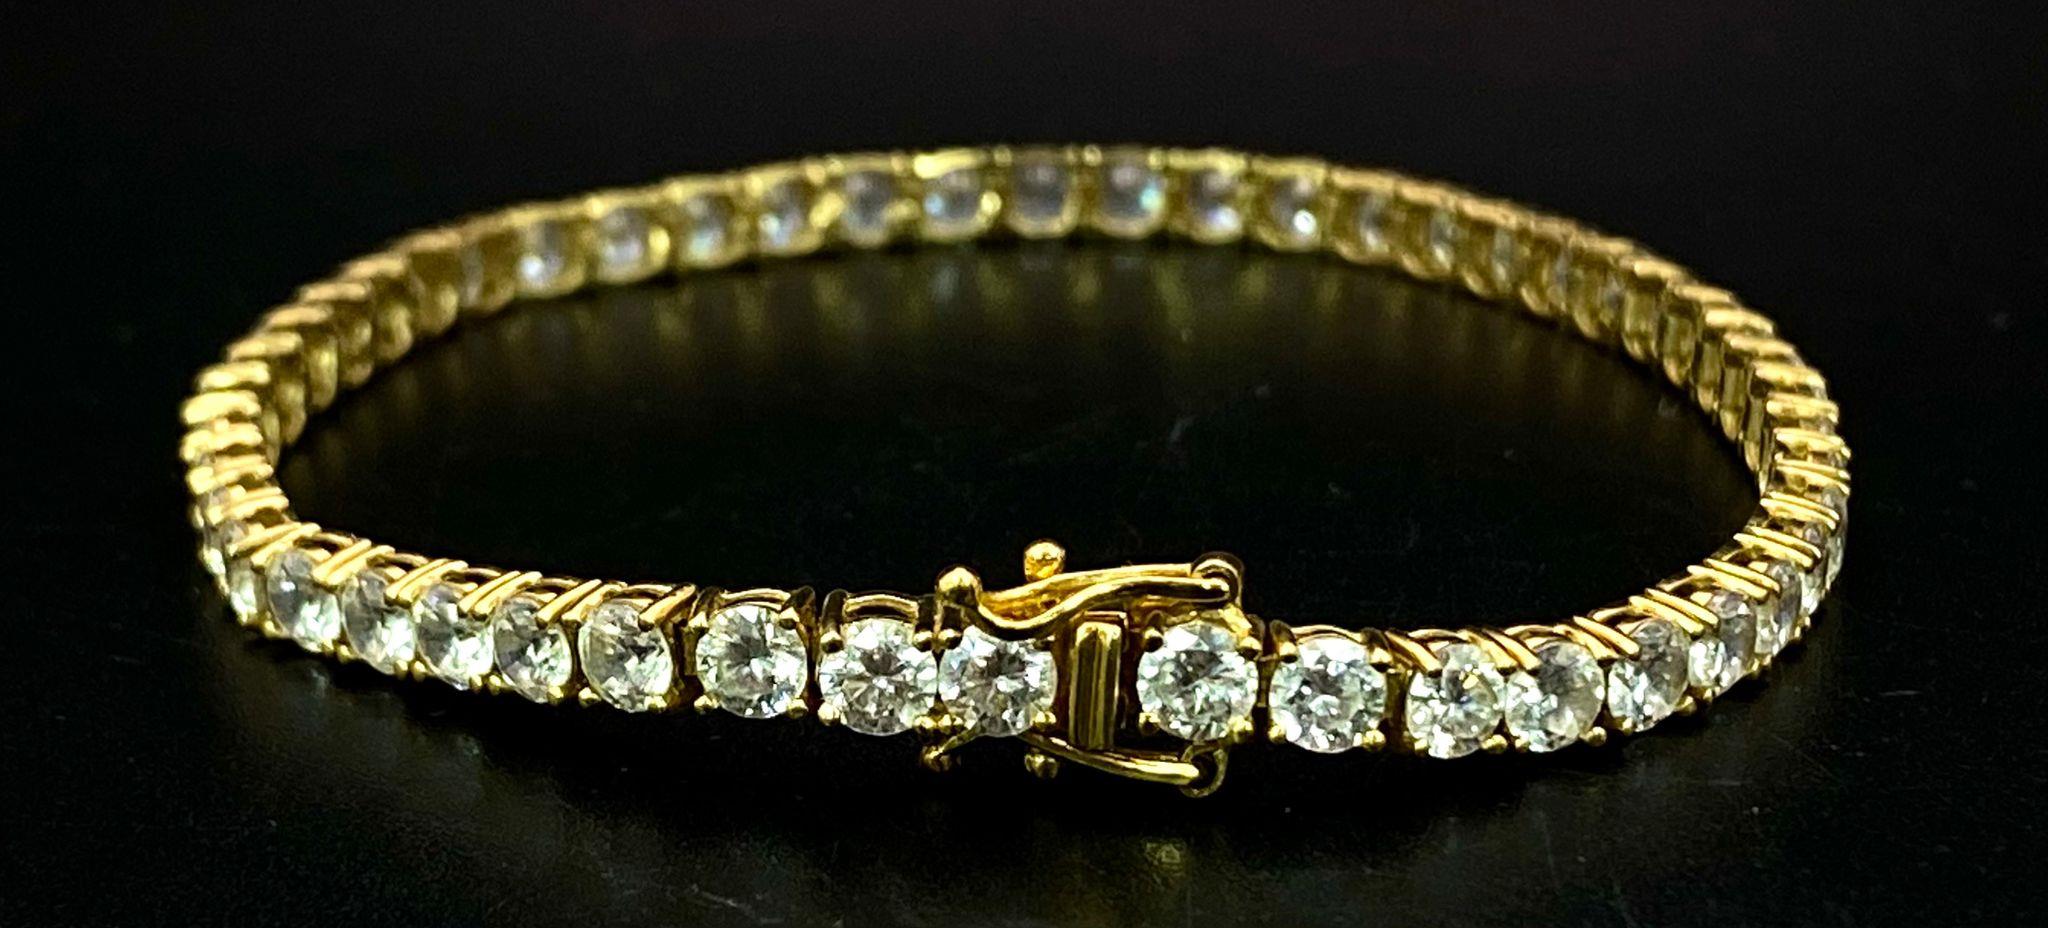 A STUNNING 14K GOLD TENNIS BRACELET WITH BRIGHT SPARKLING ZIRCONIA STONES. 9.8gms - Image 3 of 5